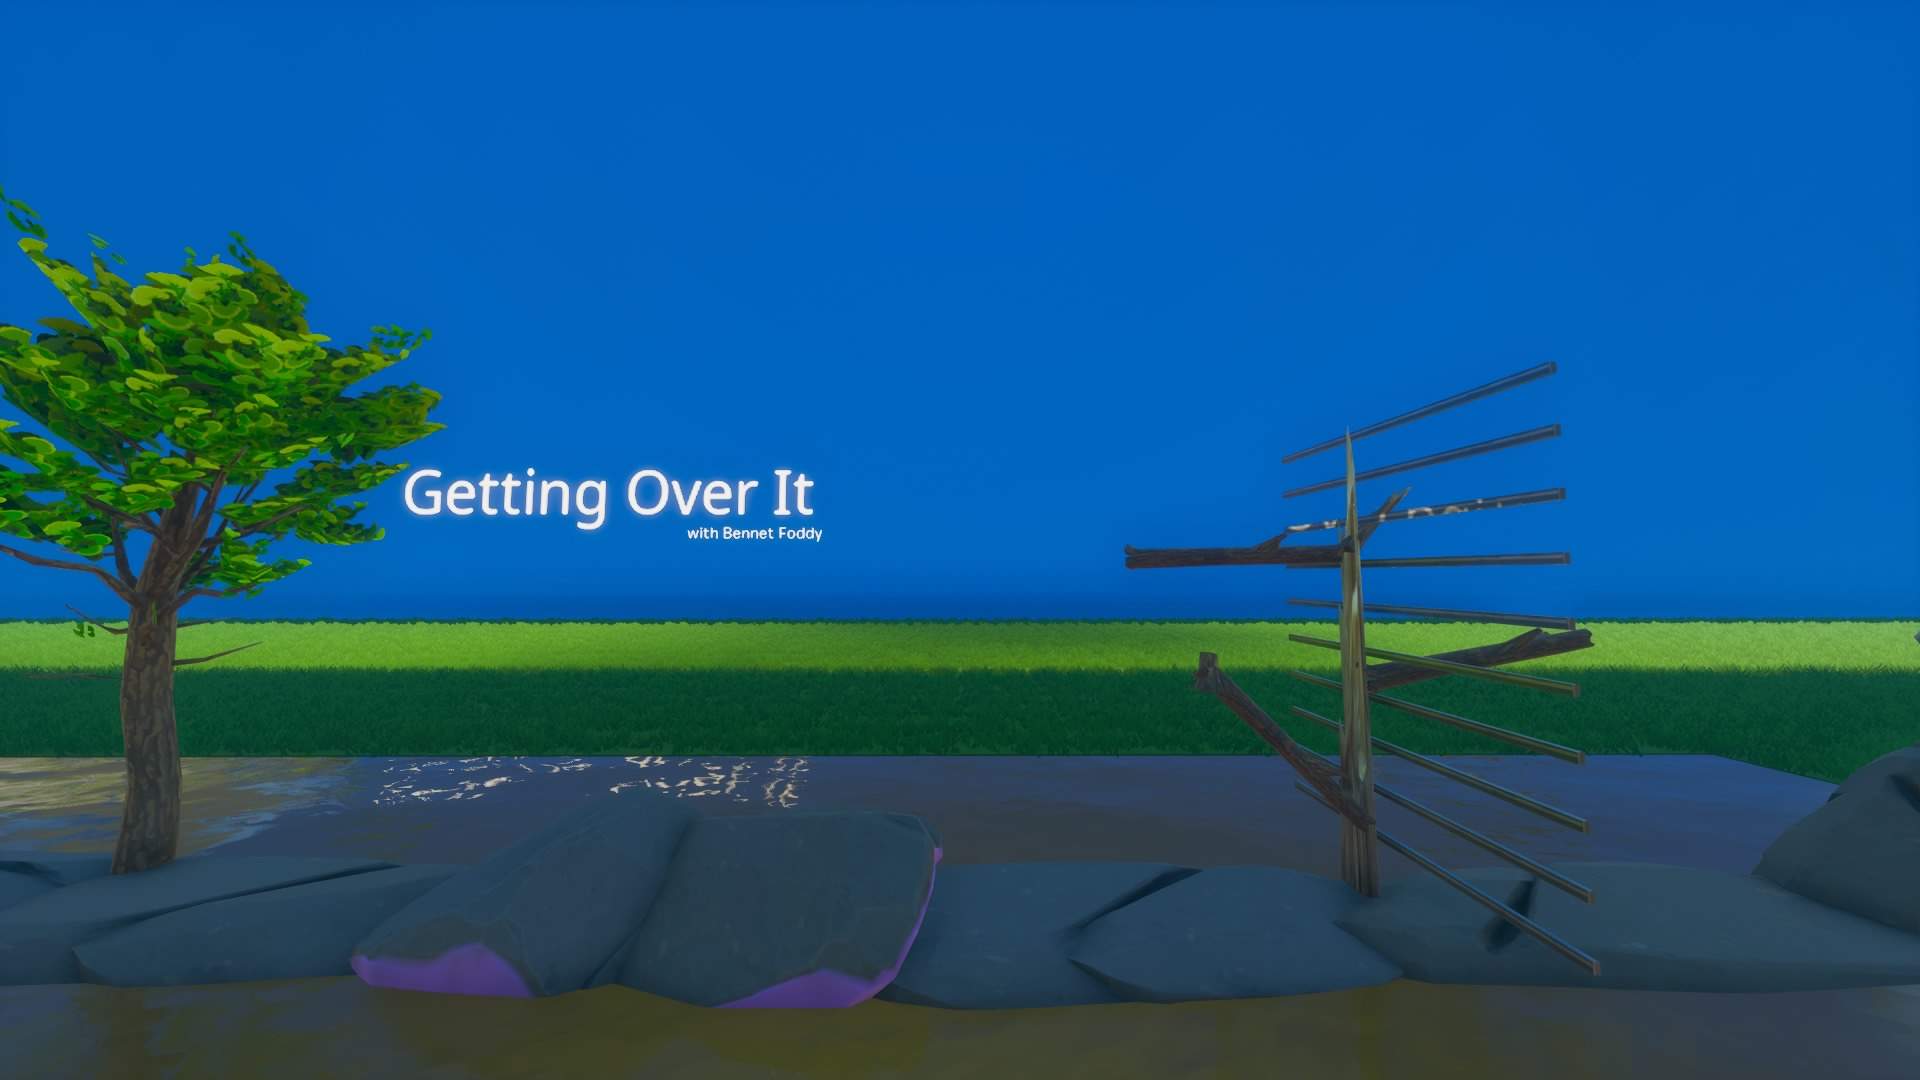 Getting Over It - Fortnite Edition 4141-3760-0680 by michadestroy -  Fortnite Creative Map Code 